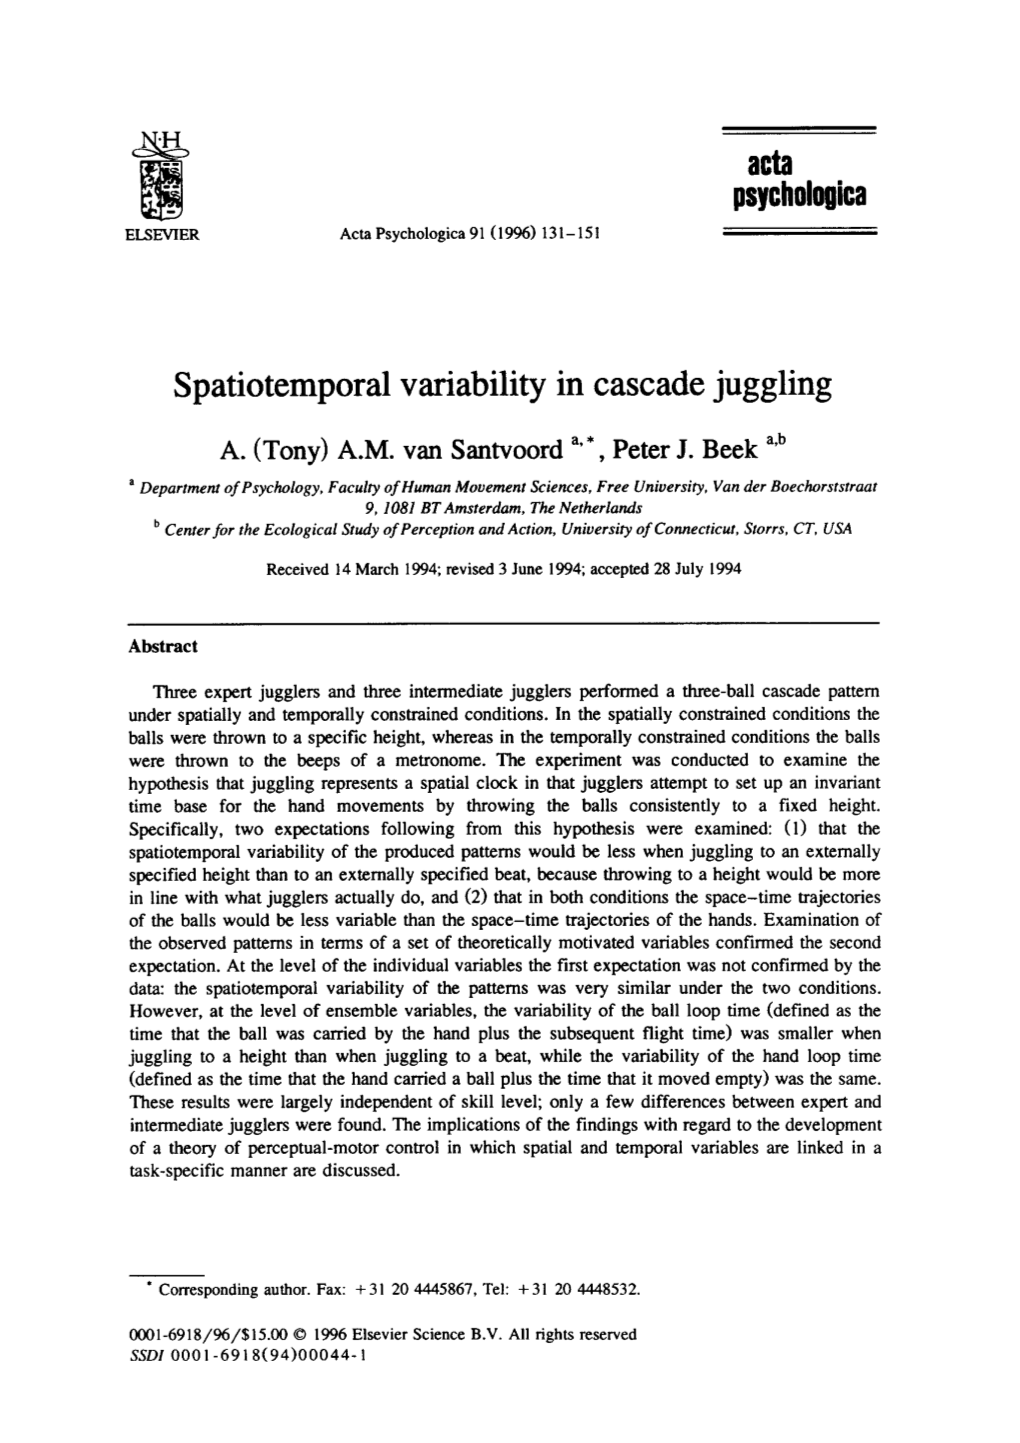 Spatiotemporal Variability in Cascade Juggling